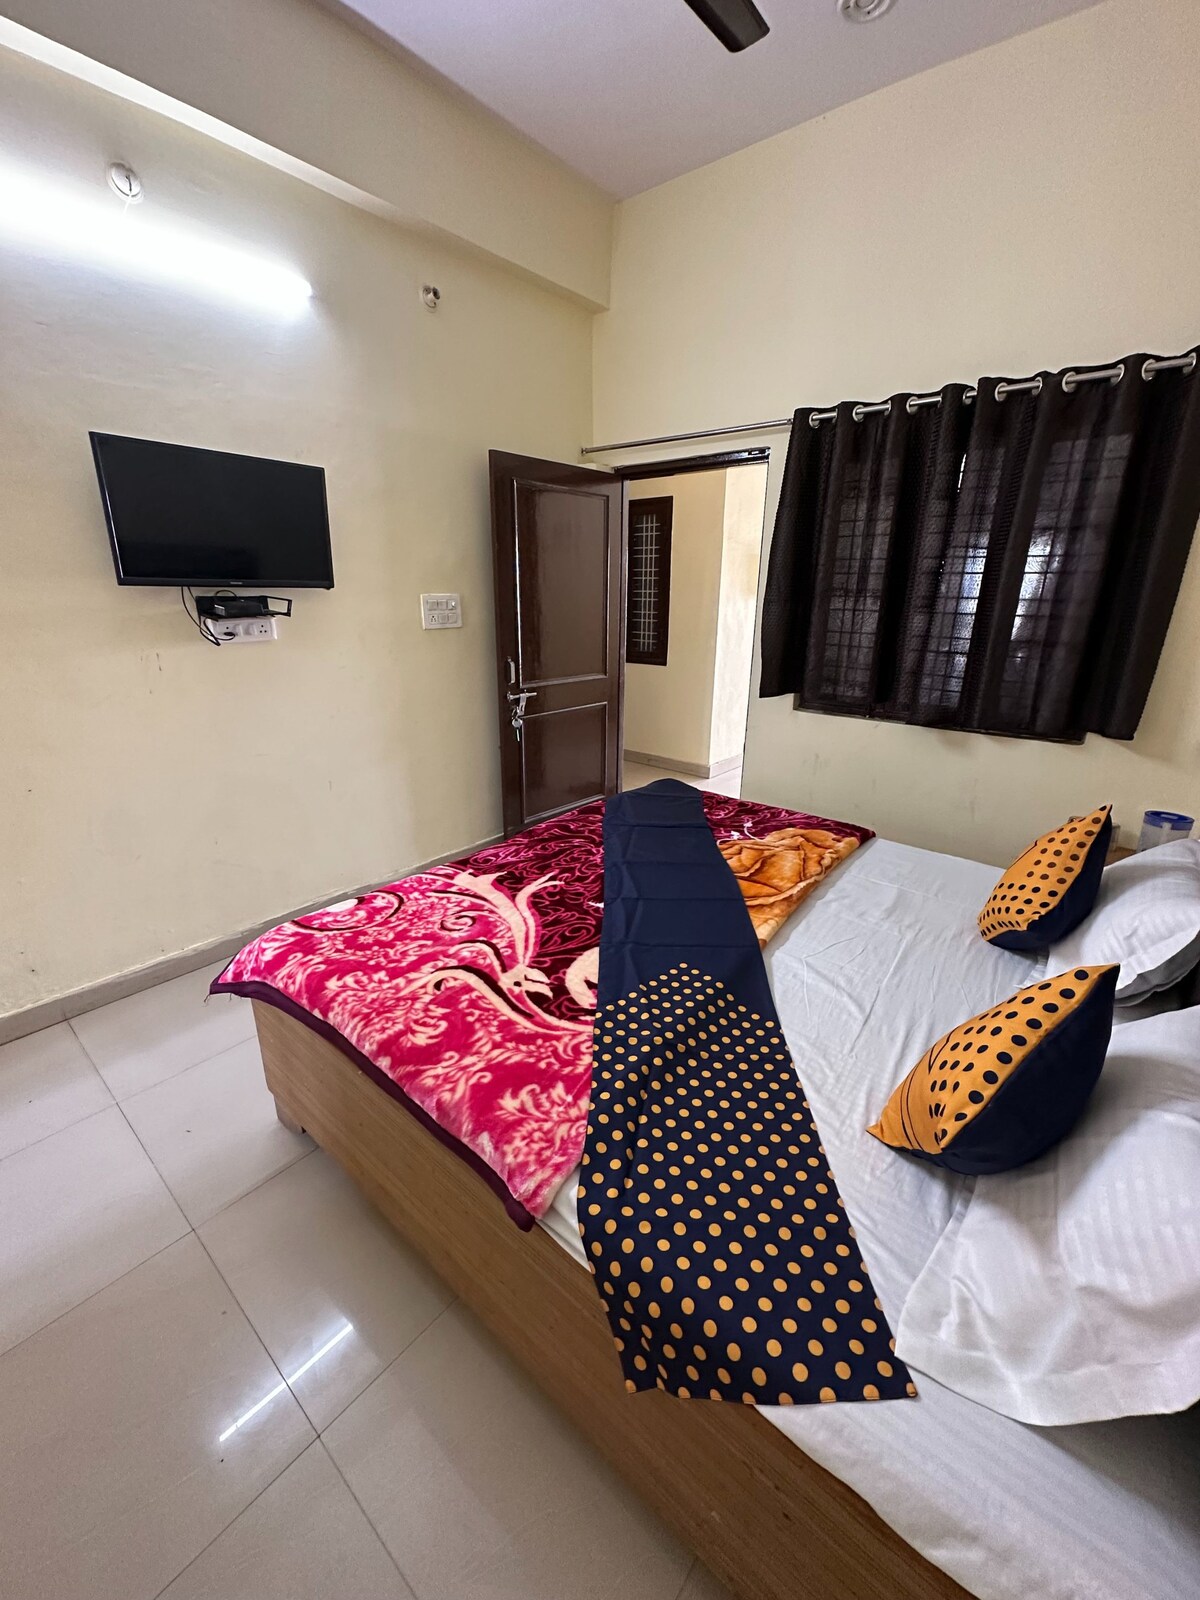 Super Deluxe Room|Swagat House